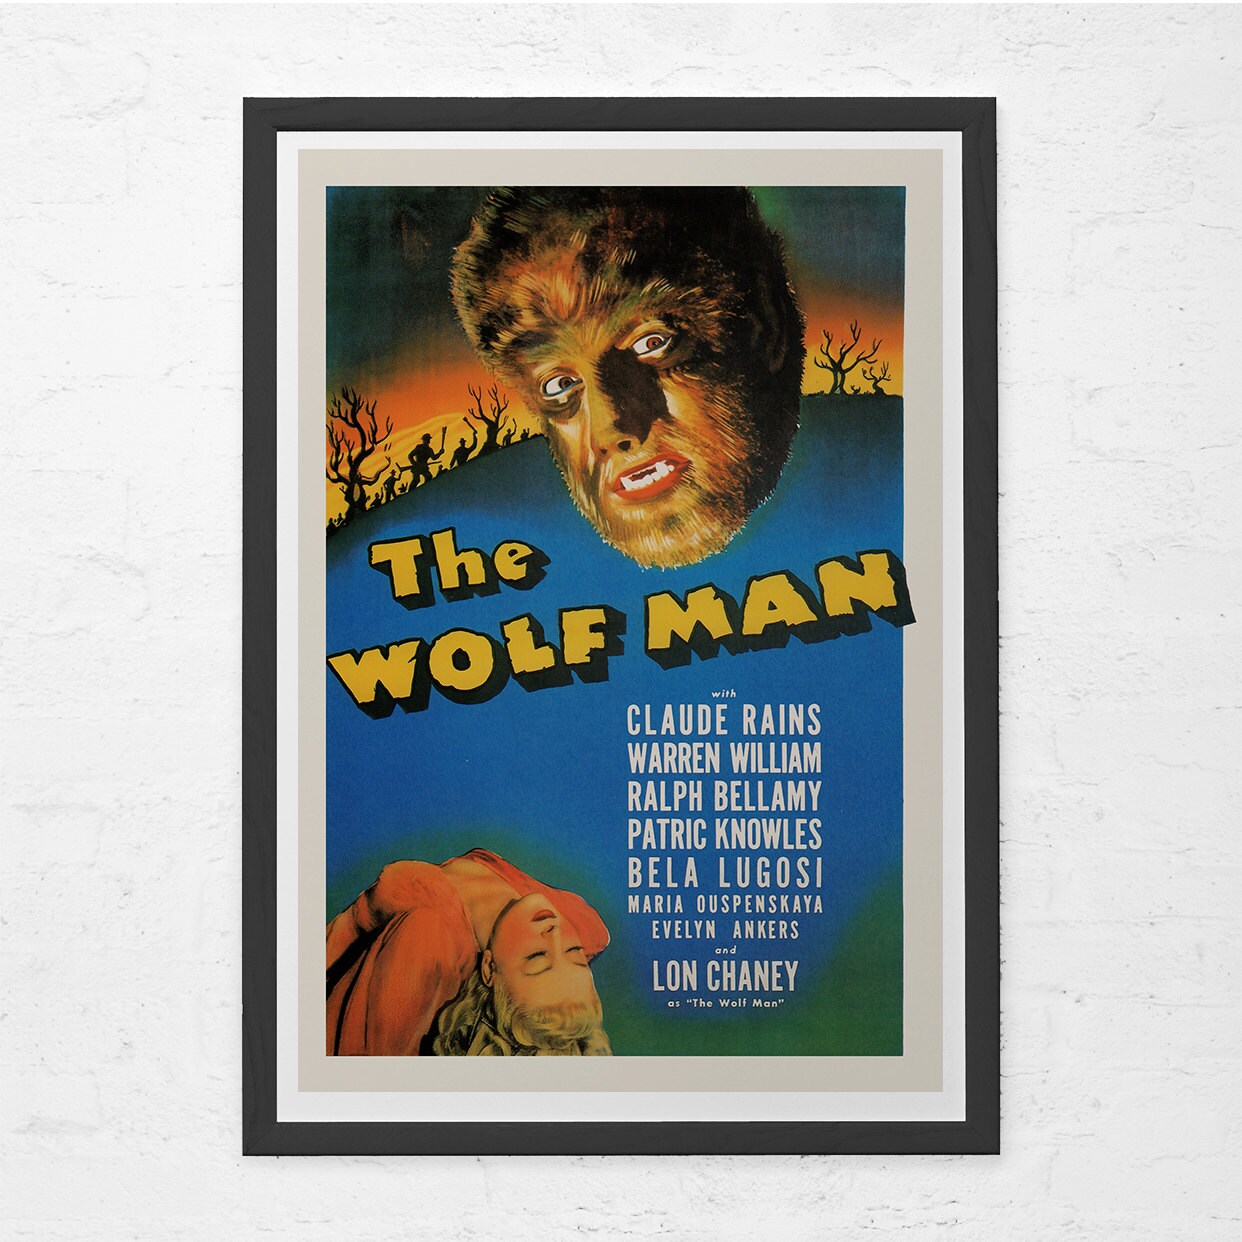 VINTAGE MOVIE POSTER - Wolf Man Movie Poster - Kitsch B-Movie Poster, Lon Chaney Poster, Home Decor Wall Art